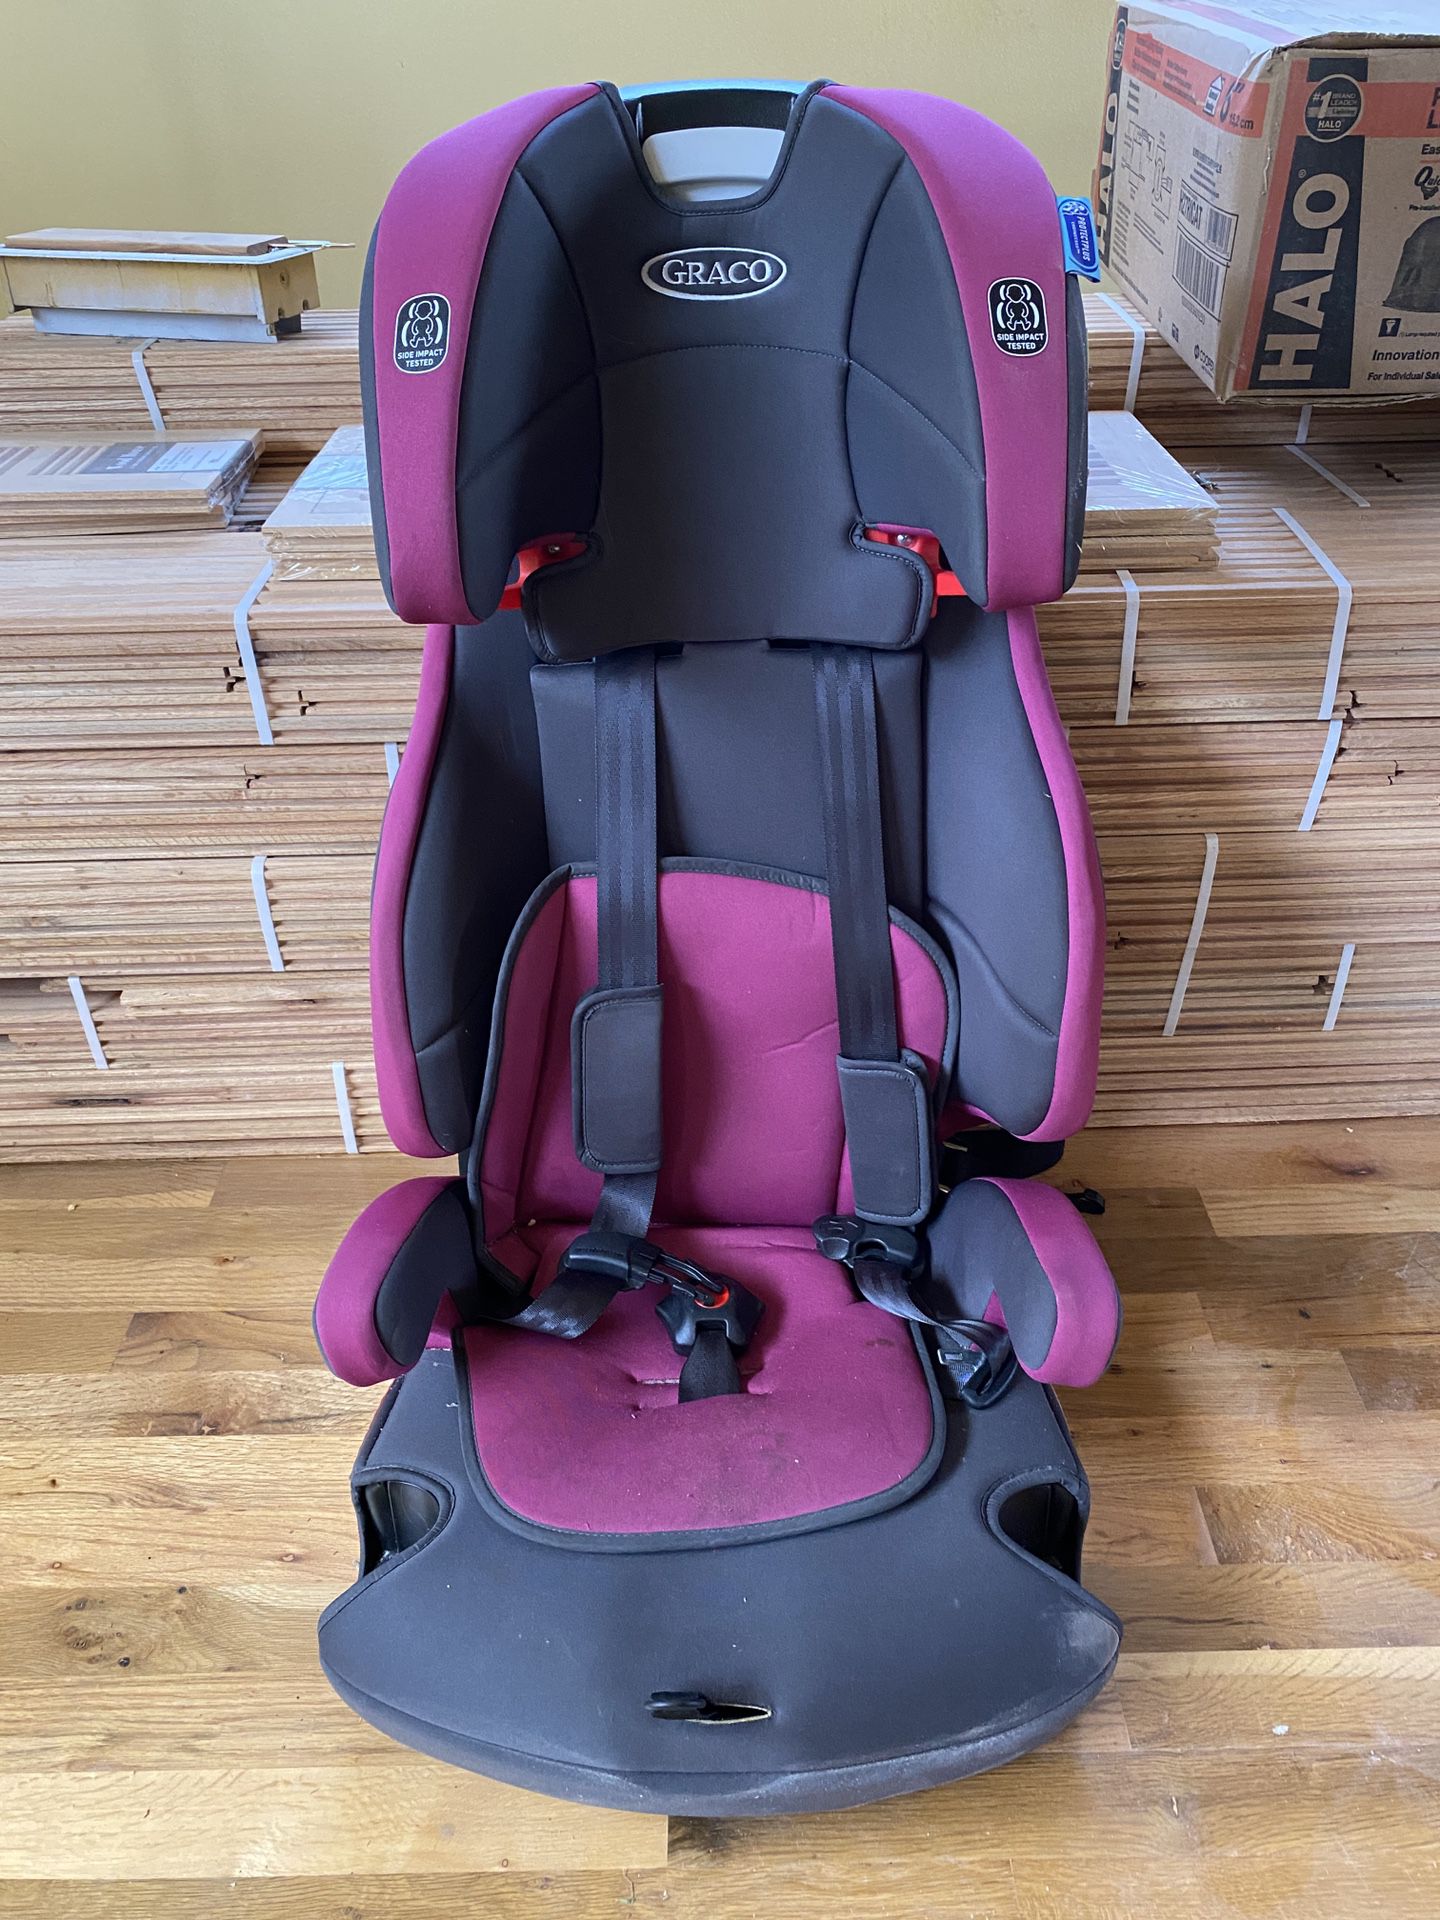 Harness To Booster Car Seat